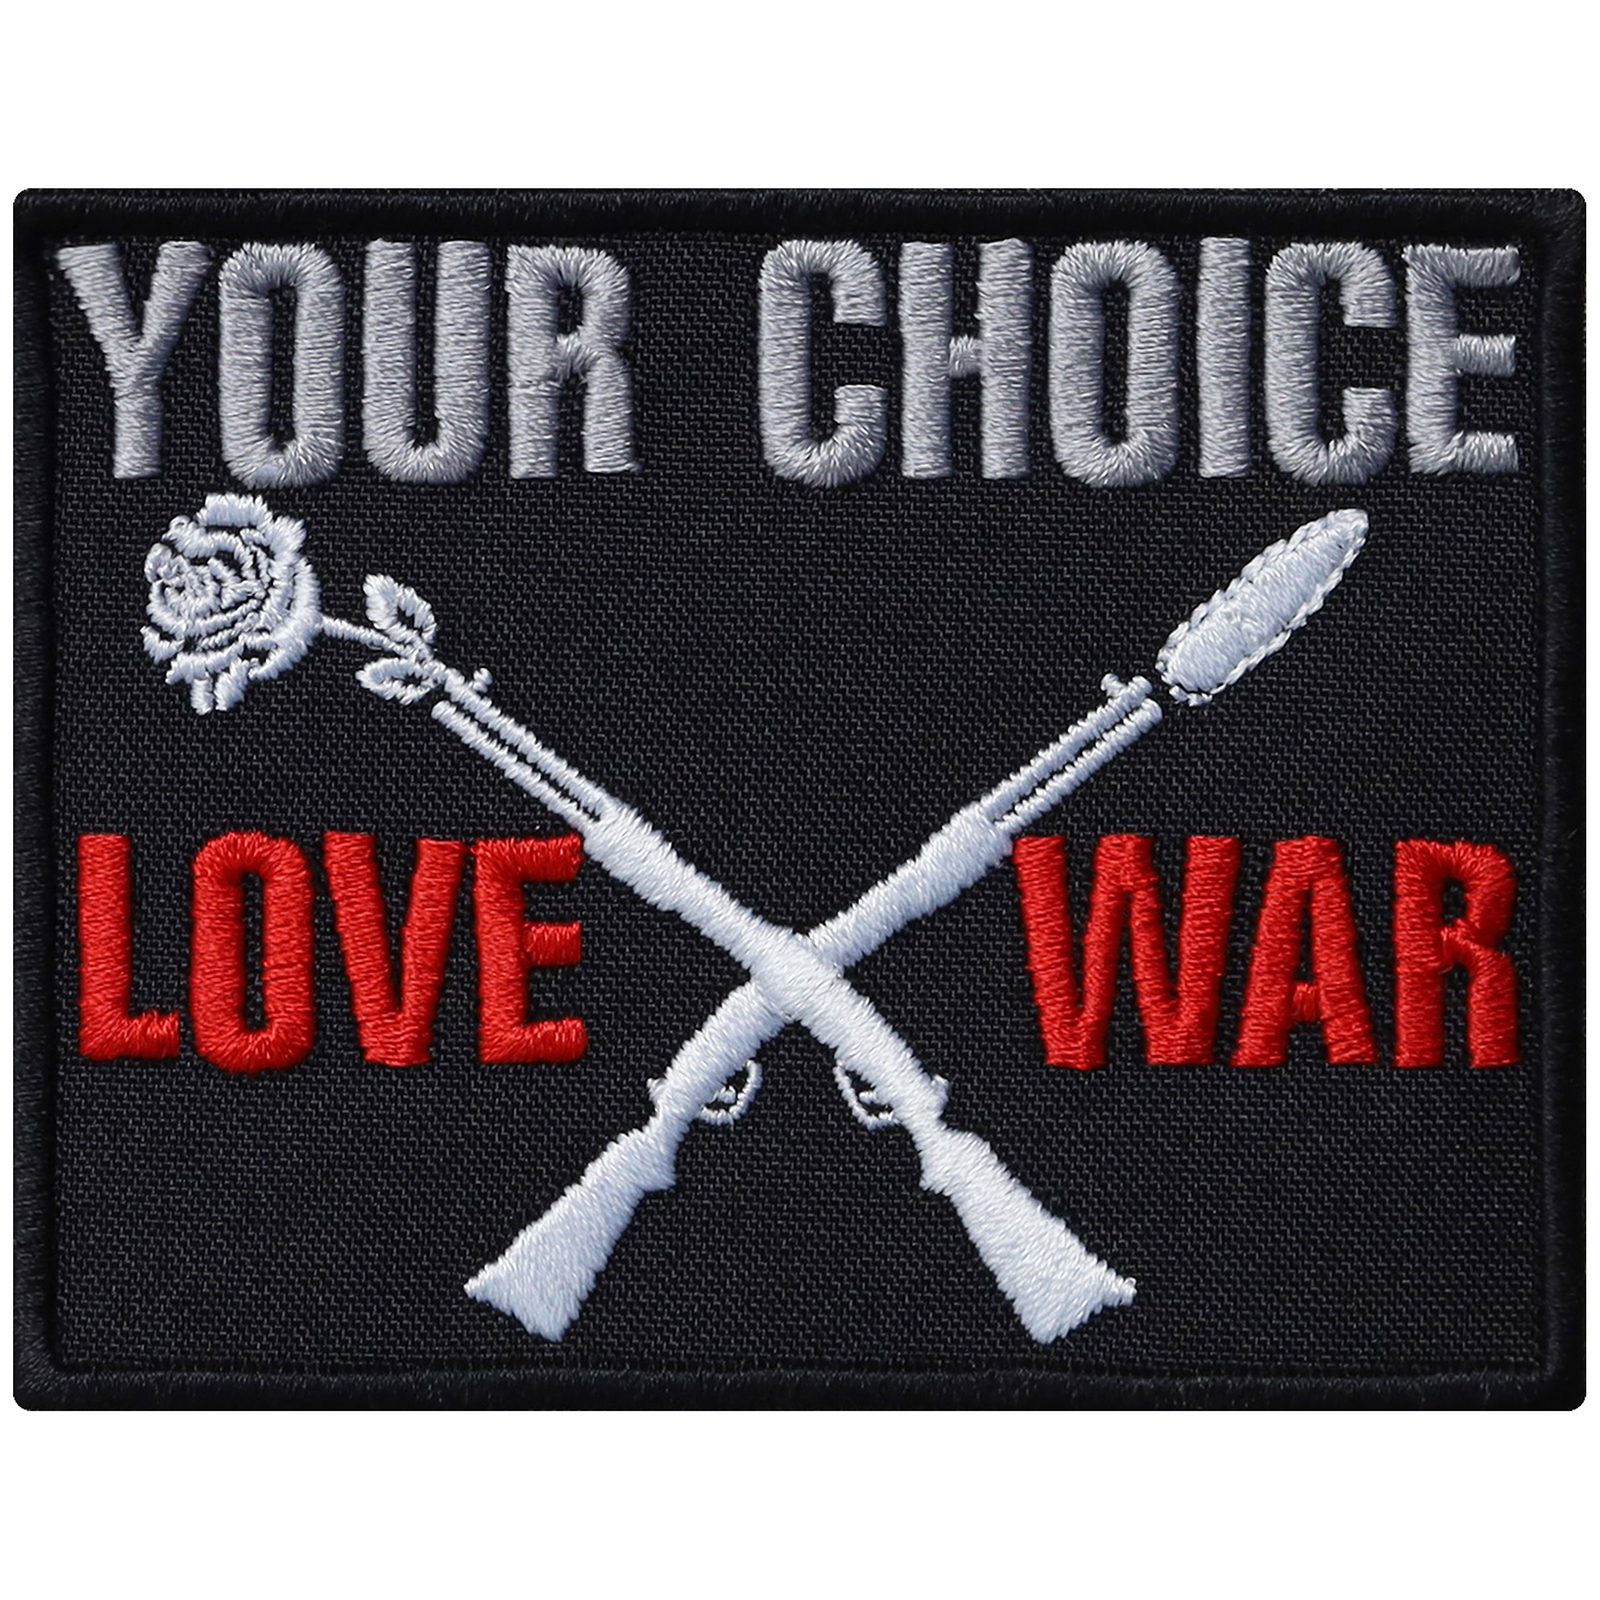 Your choice - Love or War - Patch